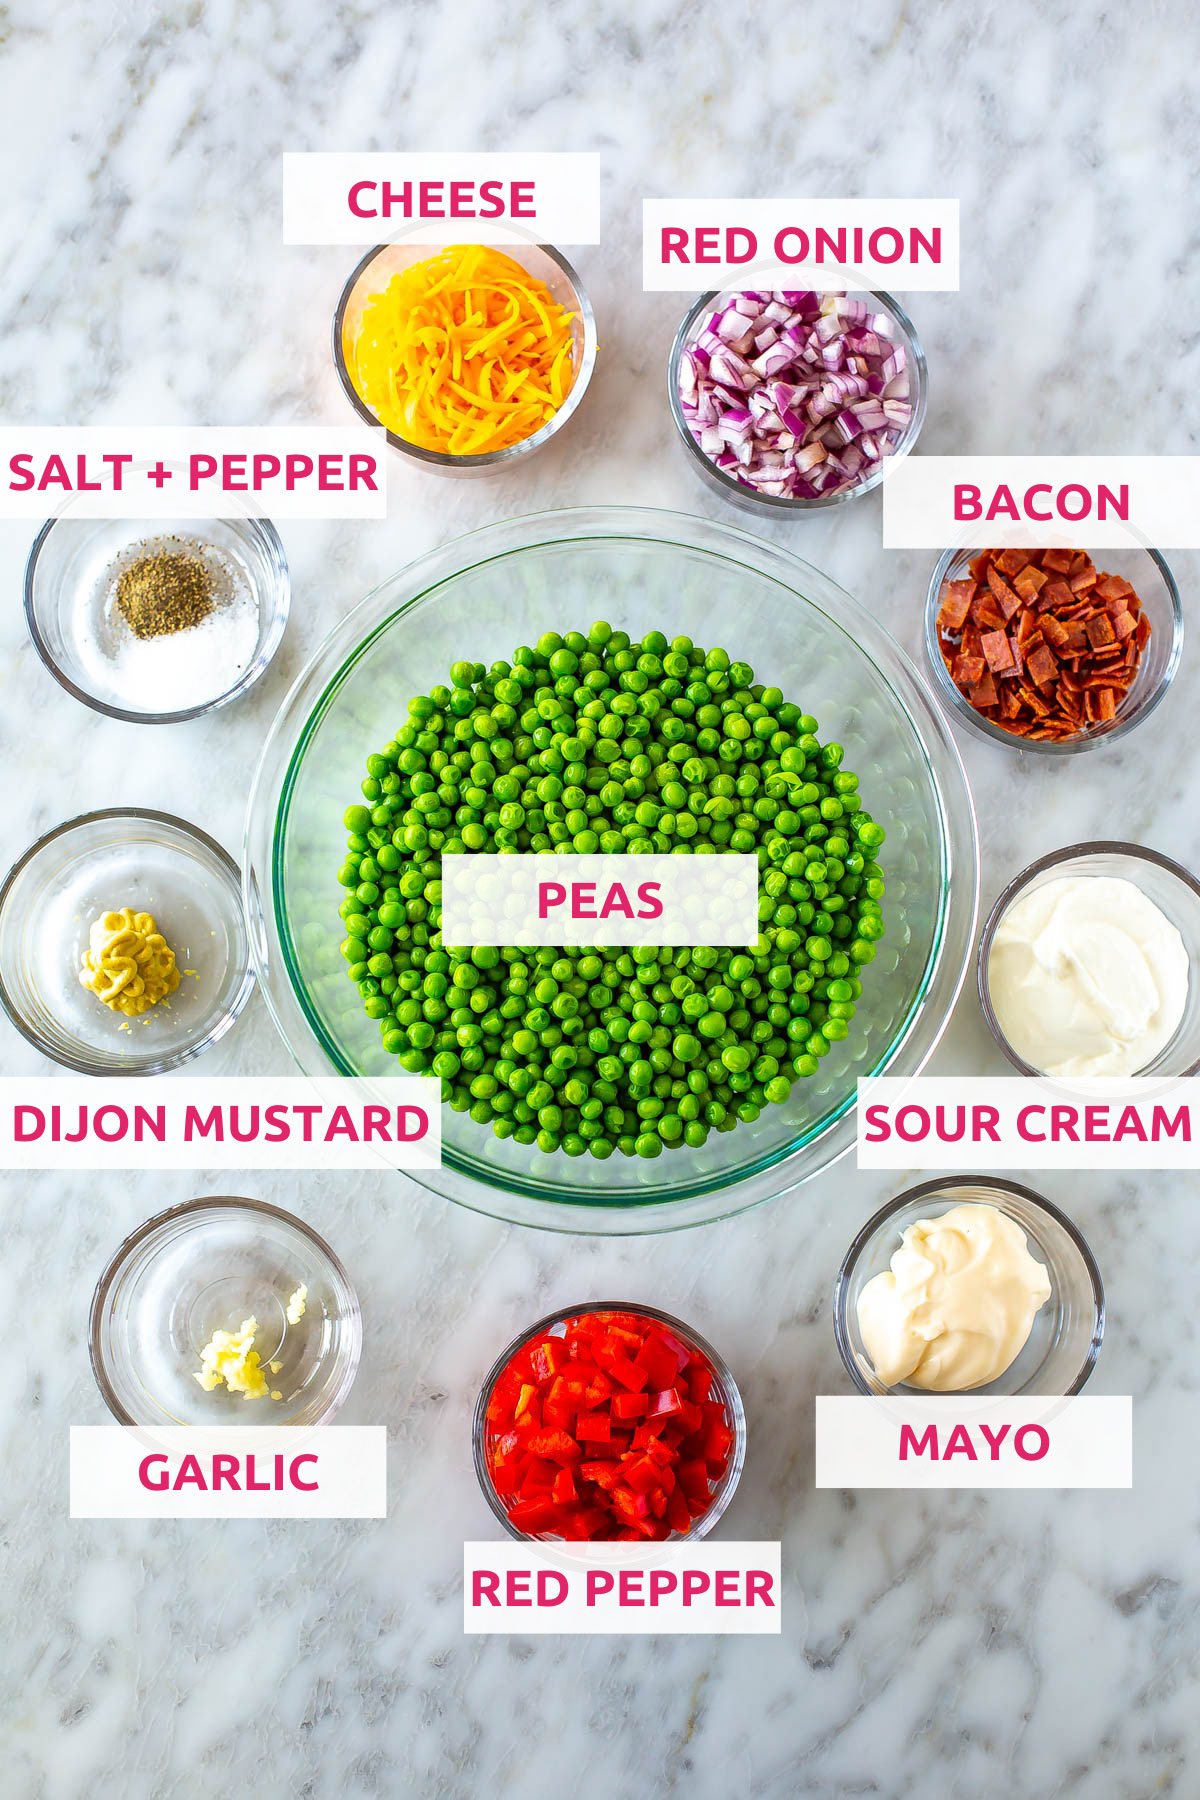 Ingredients for pea salad: peas, cheese, red onion, bacon, sour cream, mayo, red pepper, garlic, dijon mustard, salt and pepper.